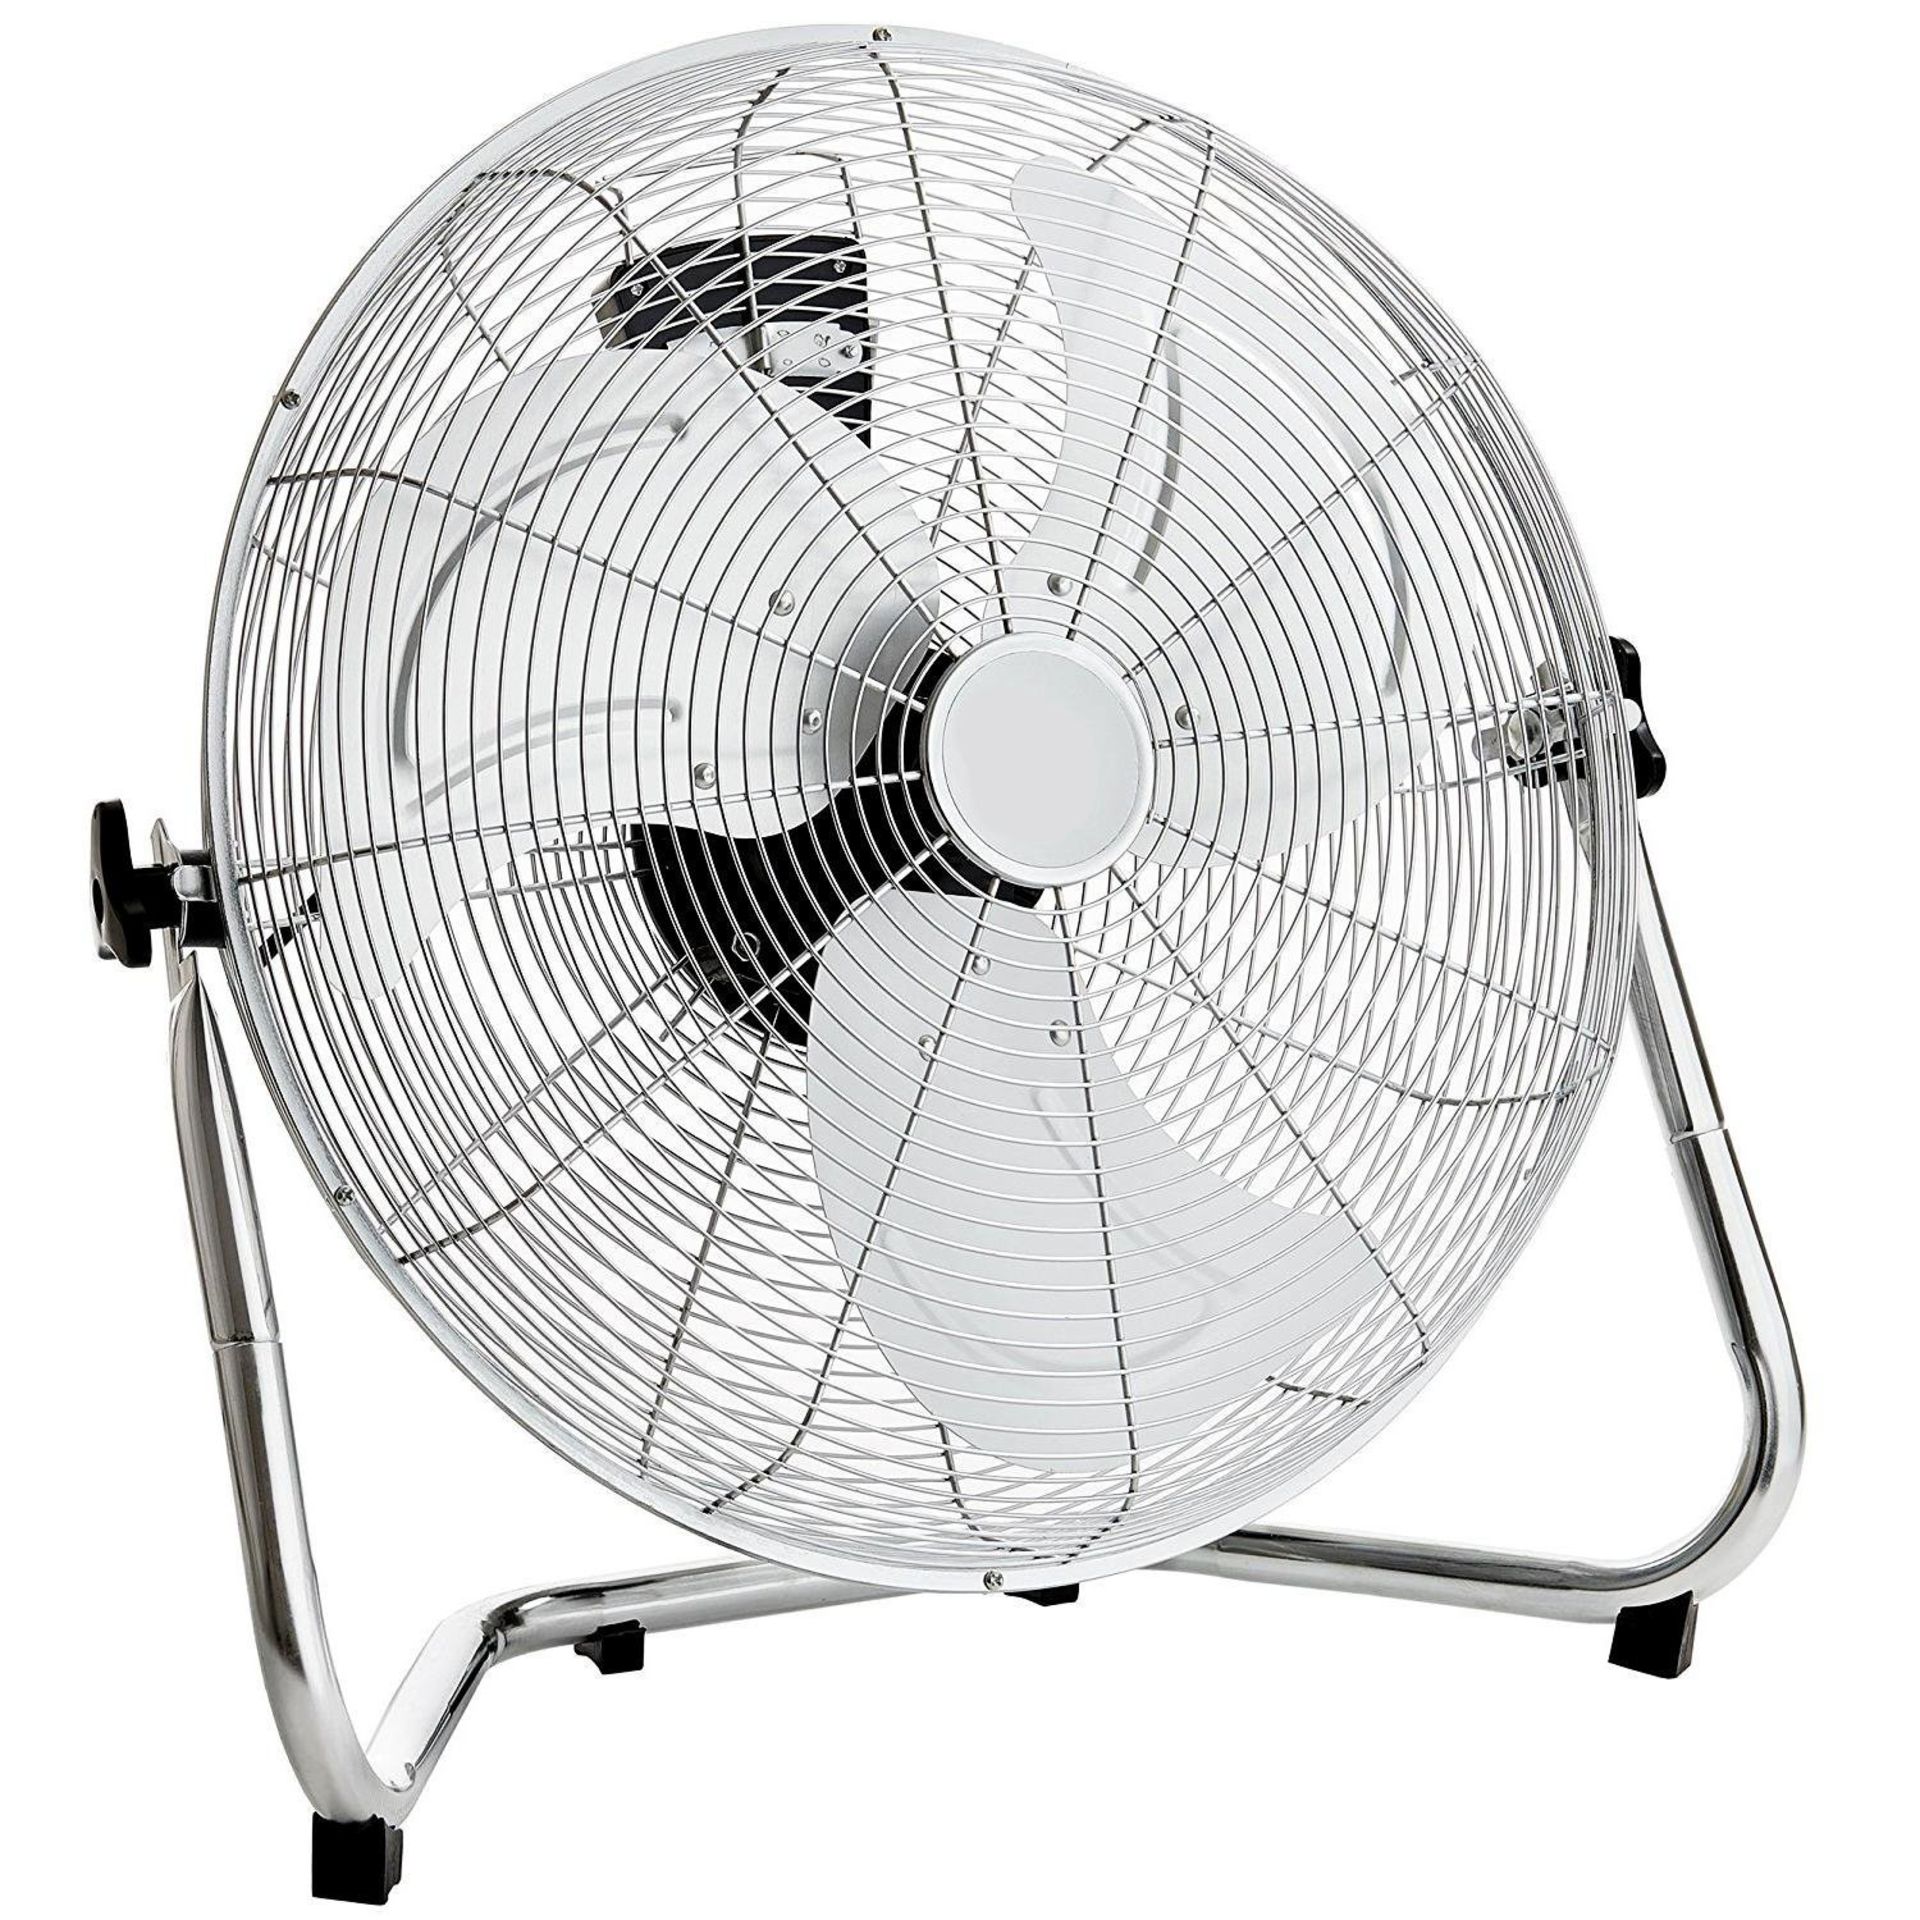 (LF131) 18" Chrome 3 Speed Free Standing Gym Fan 3 Speed Push Button Speed Control Fixed Posi...